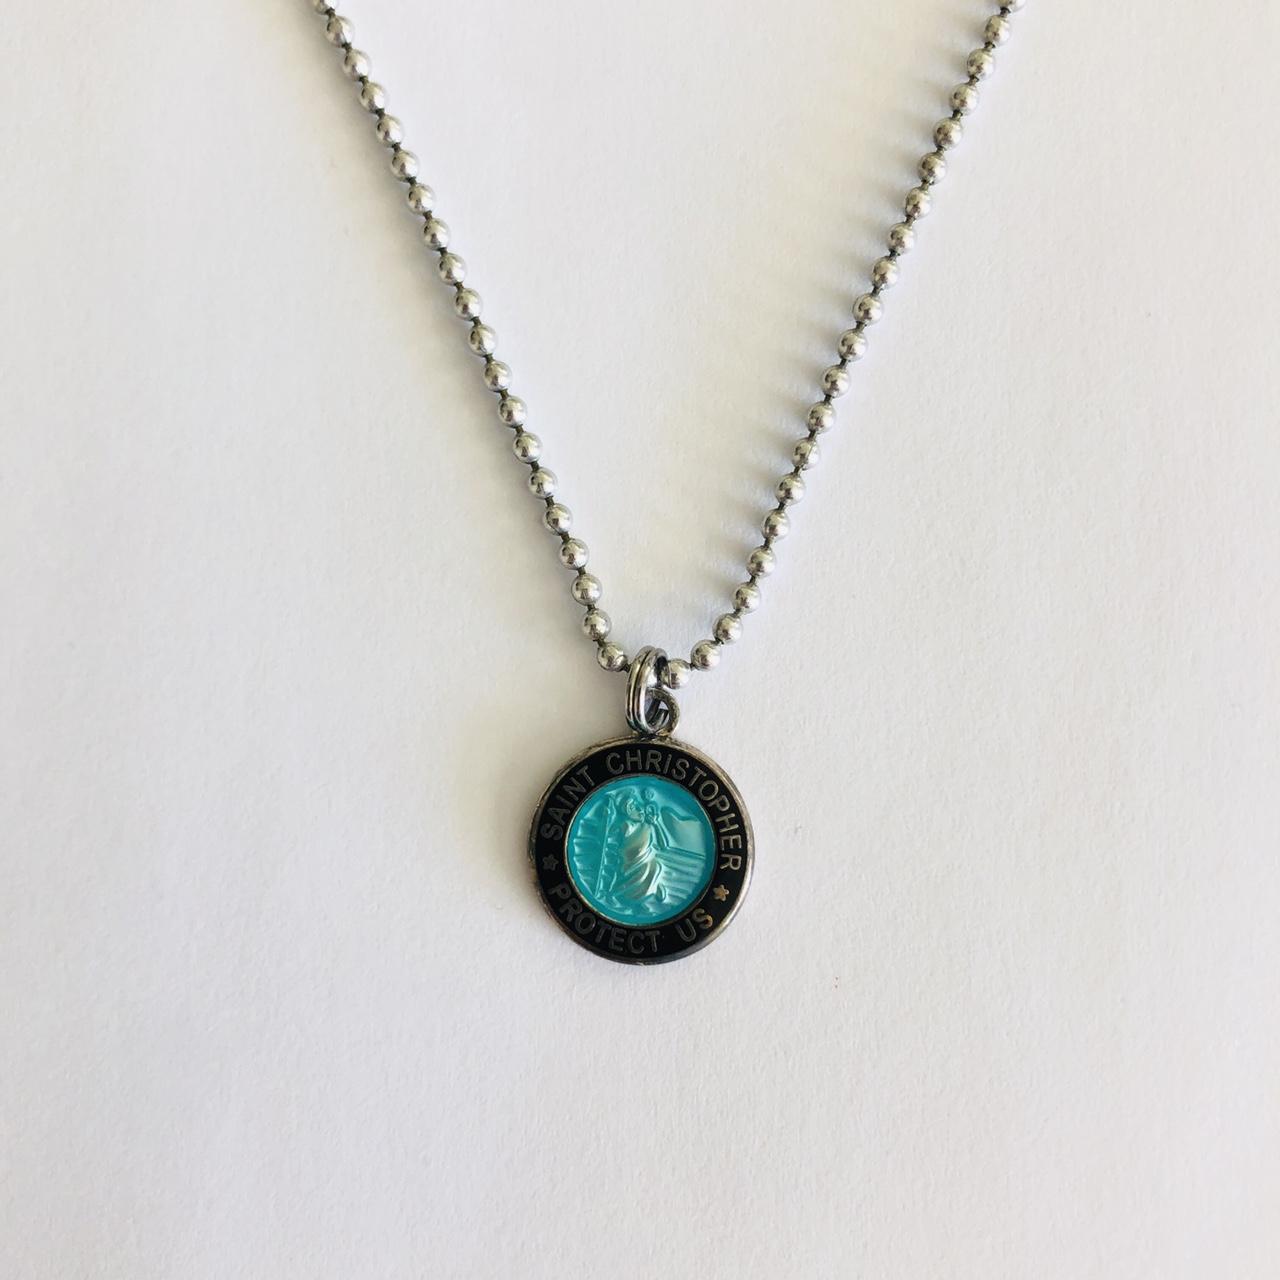 The Classic Surfer Necklace // St. Christopher Surf Medals – Get Back  Necklaces